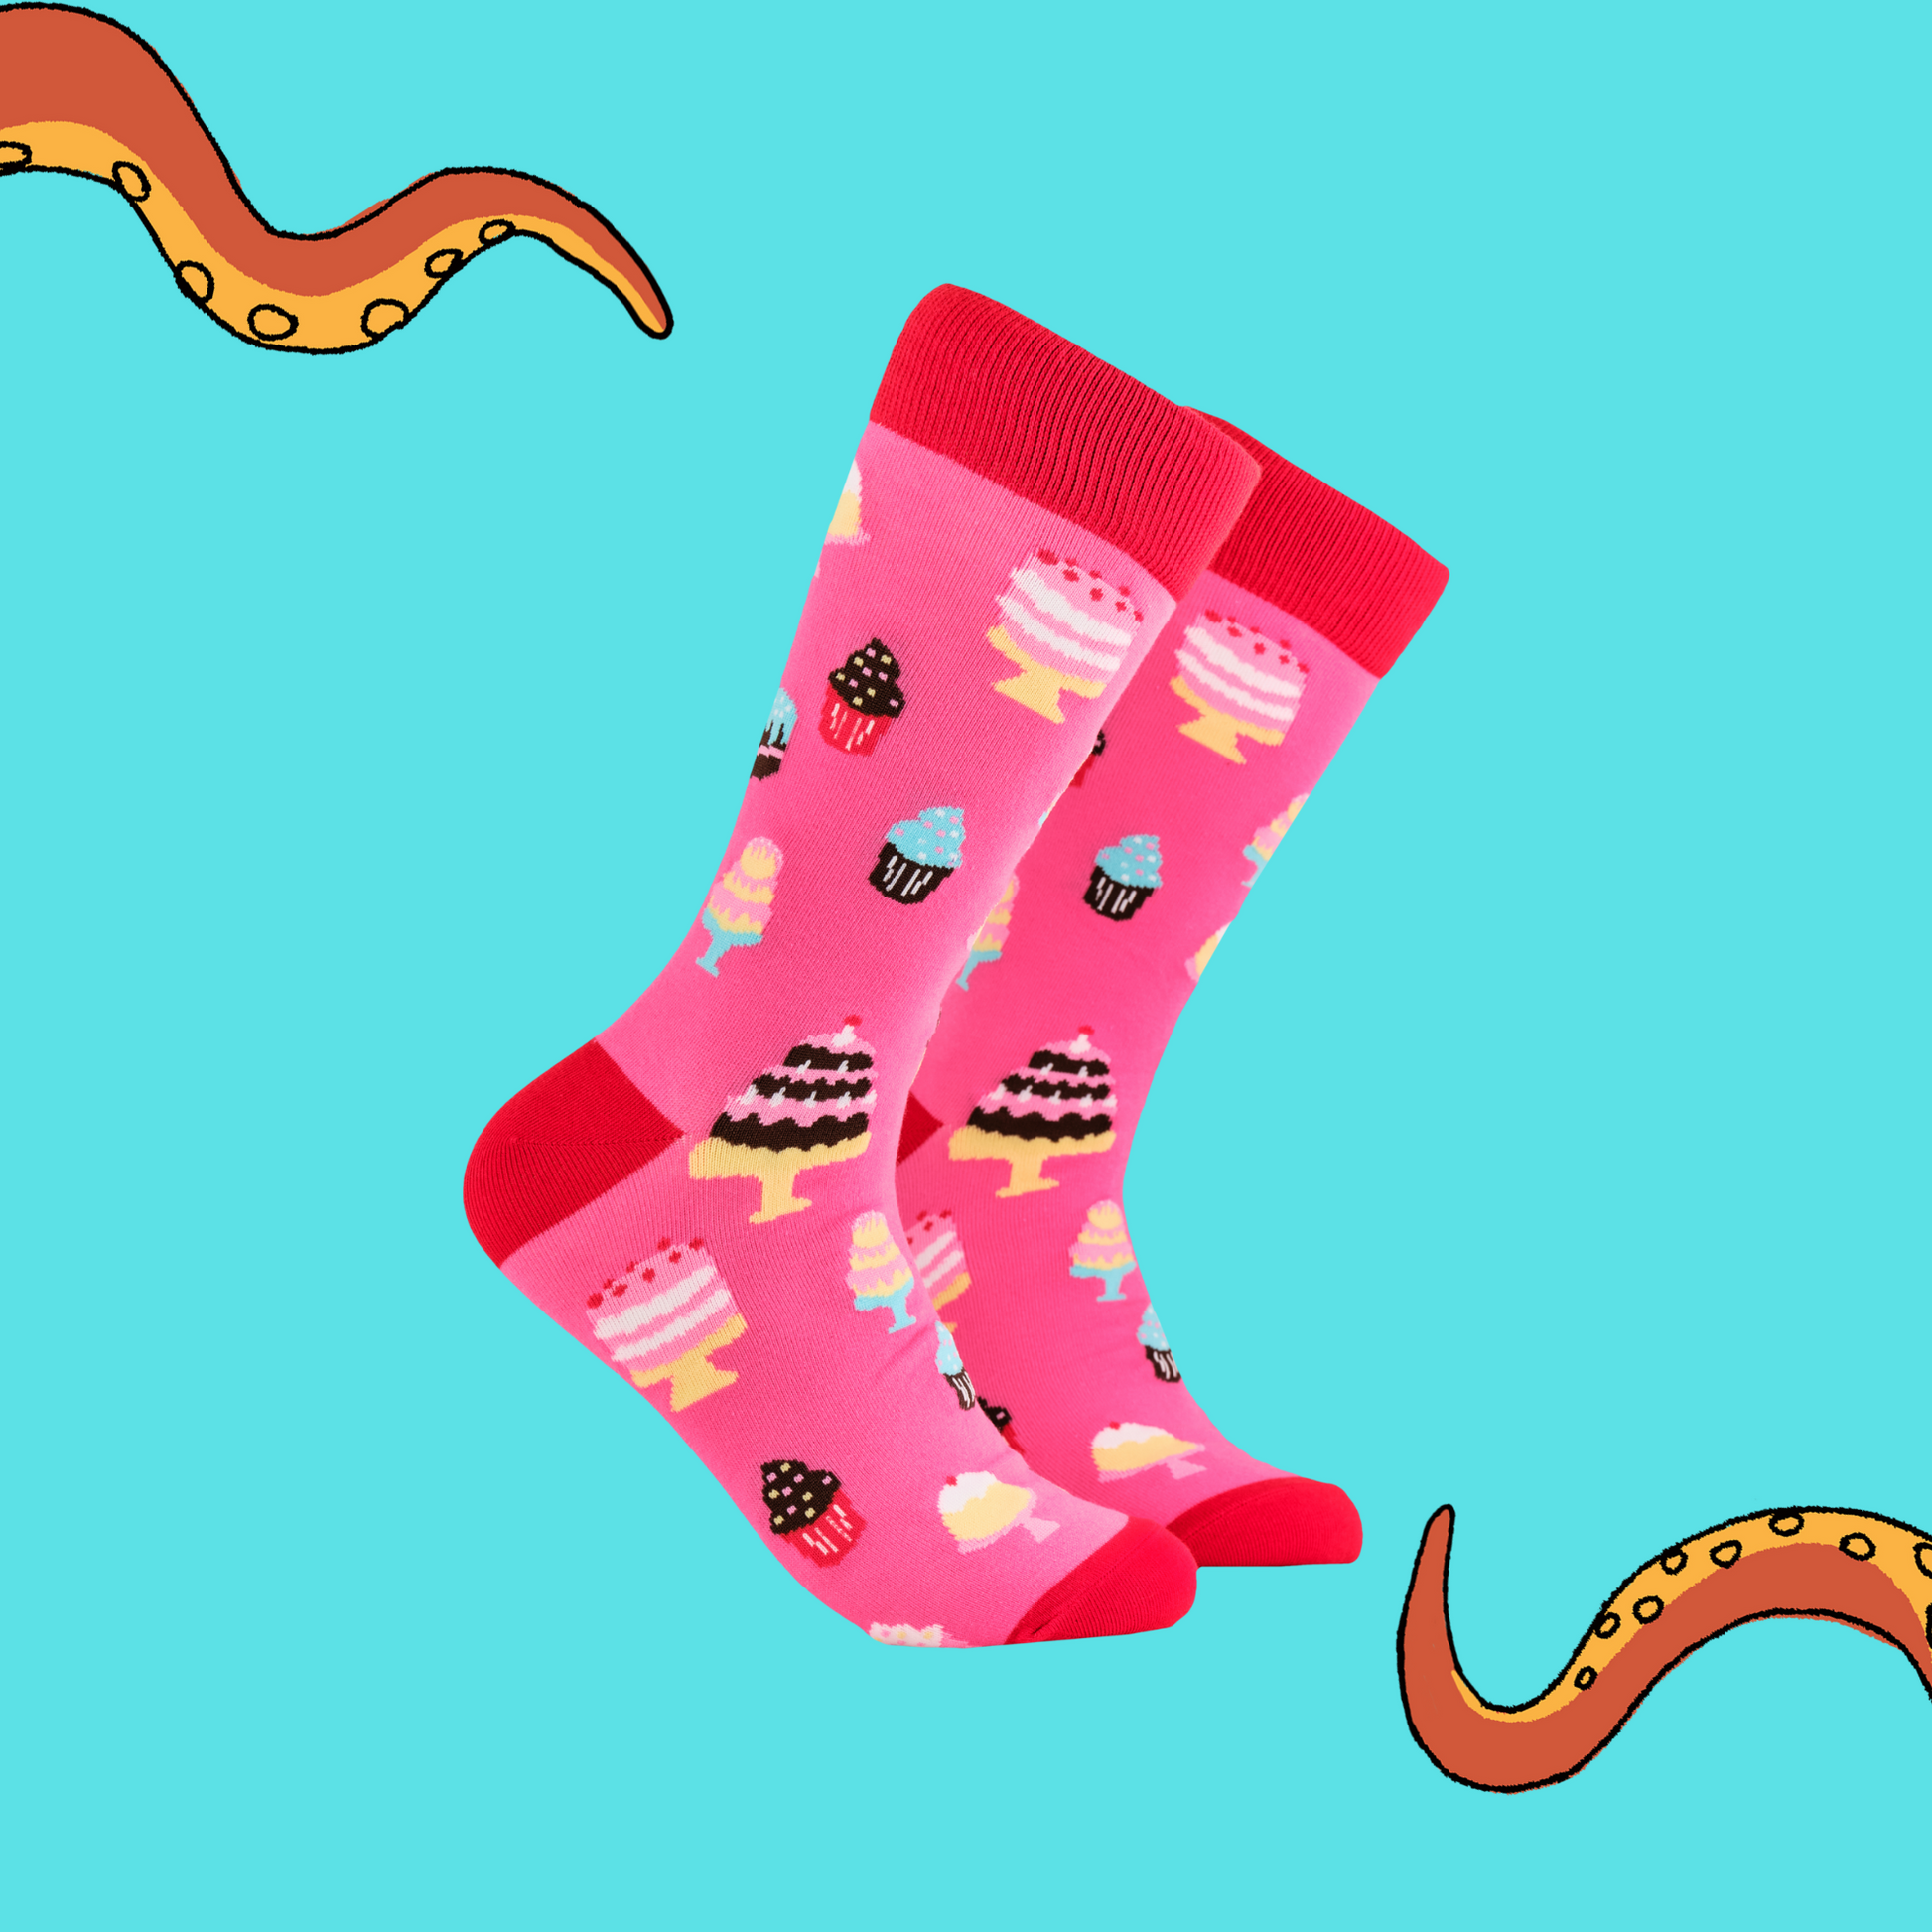 A pair of socks depicting cakes. Pink legs, red cuff, heel and toe.